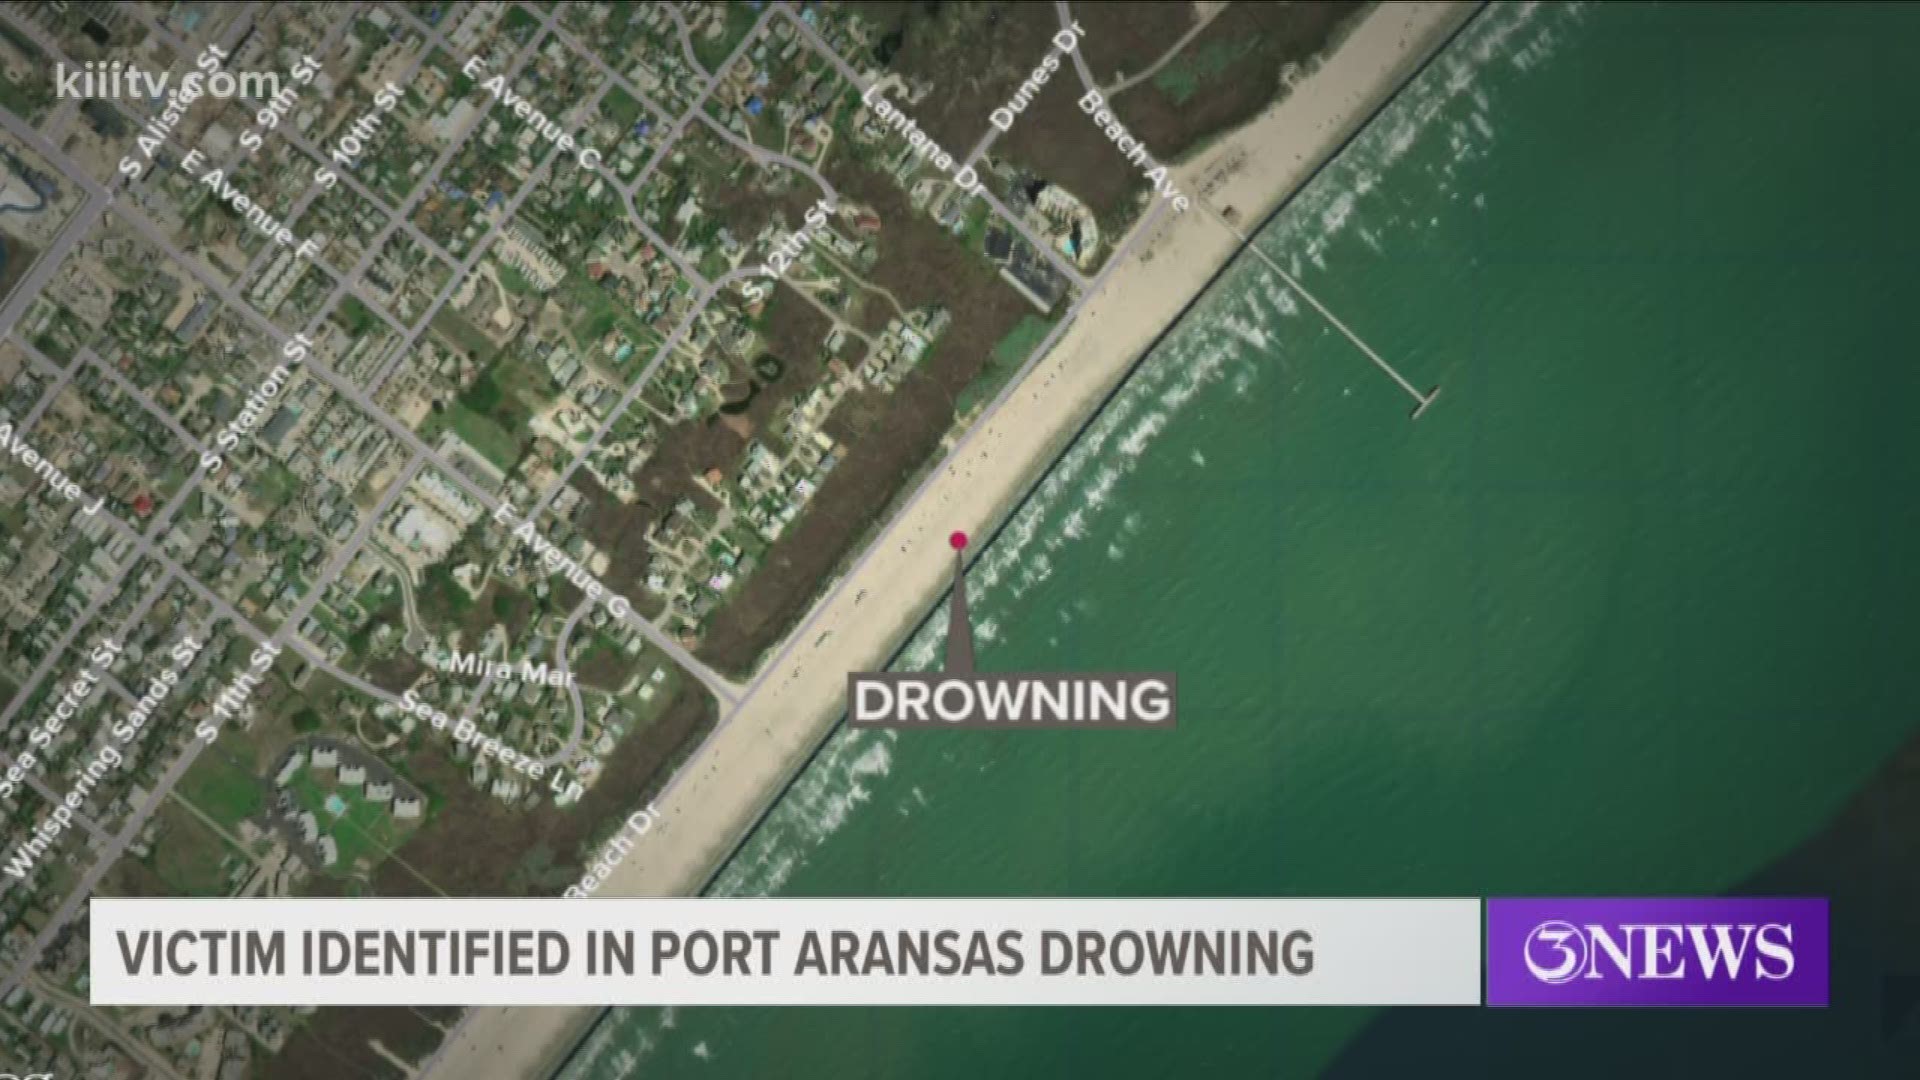 A three-year-old boy who drowned in the waters of Port Aransas, Texas, over the weekend has been identfied by the Nueces County Medical Examiner's Office.